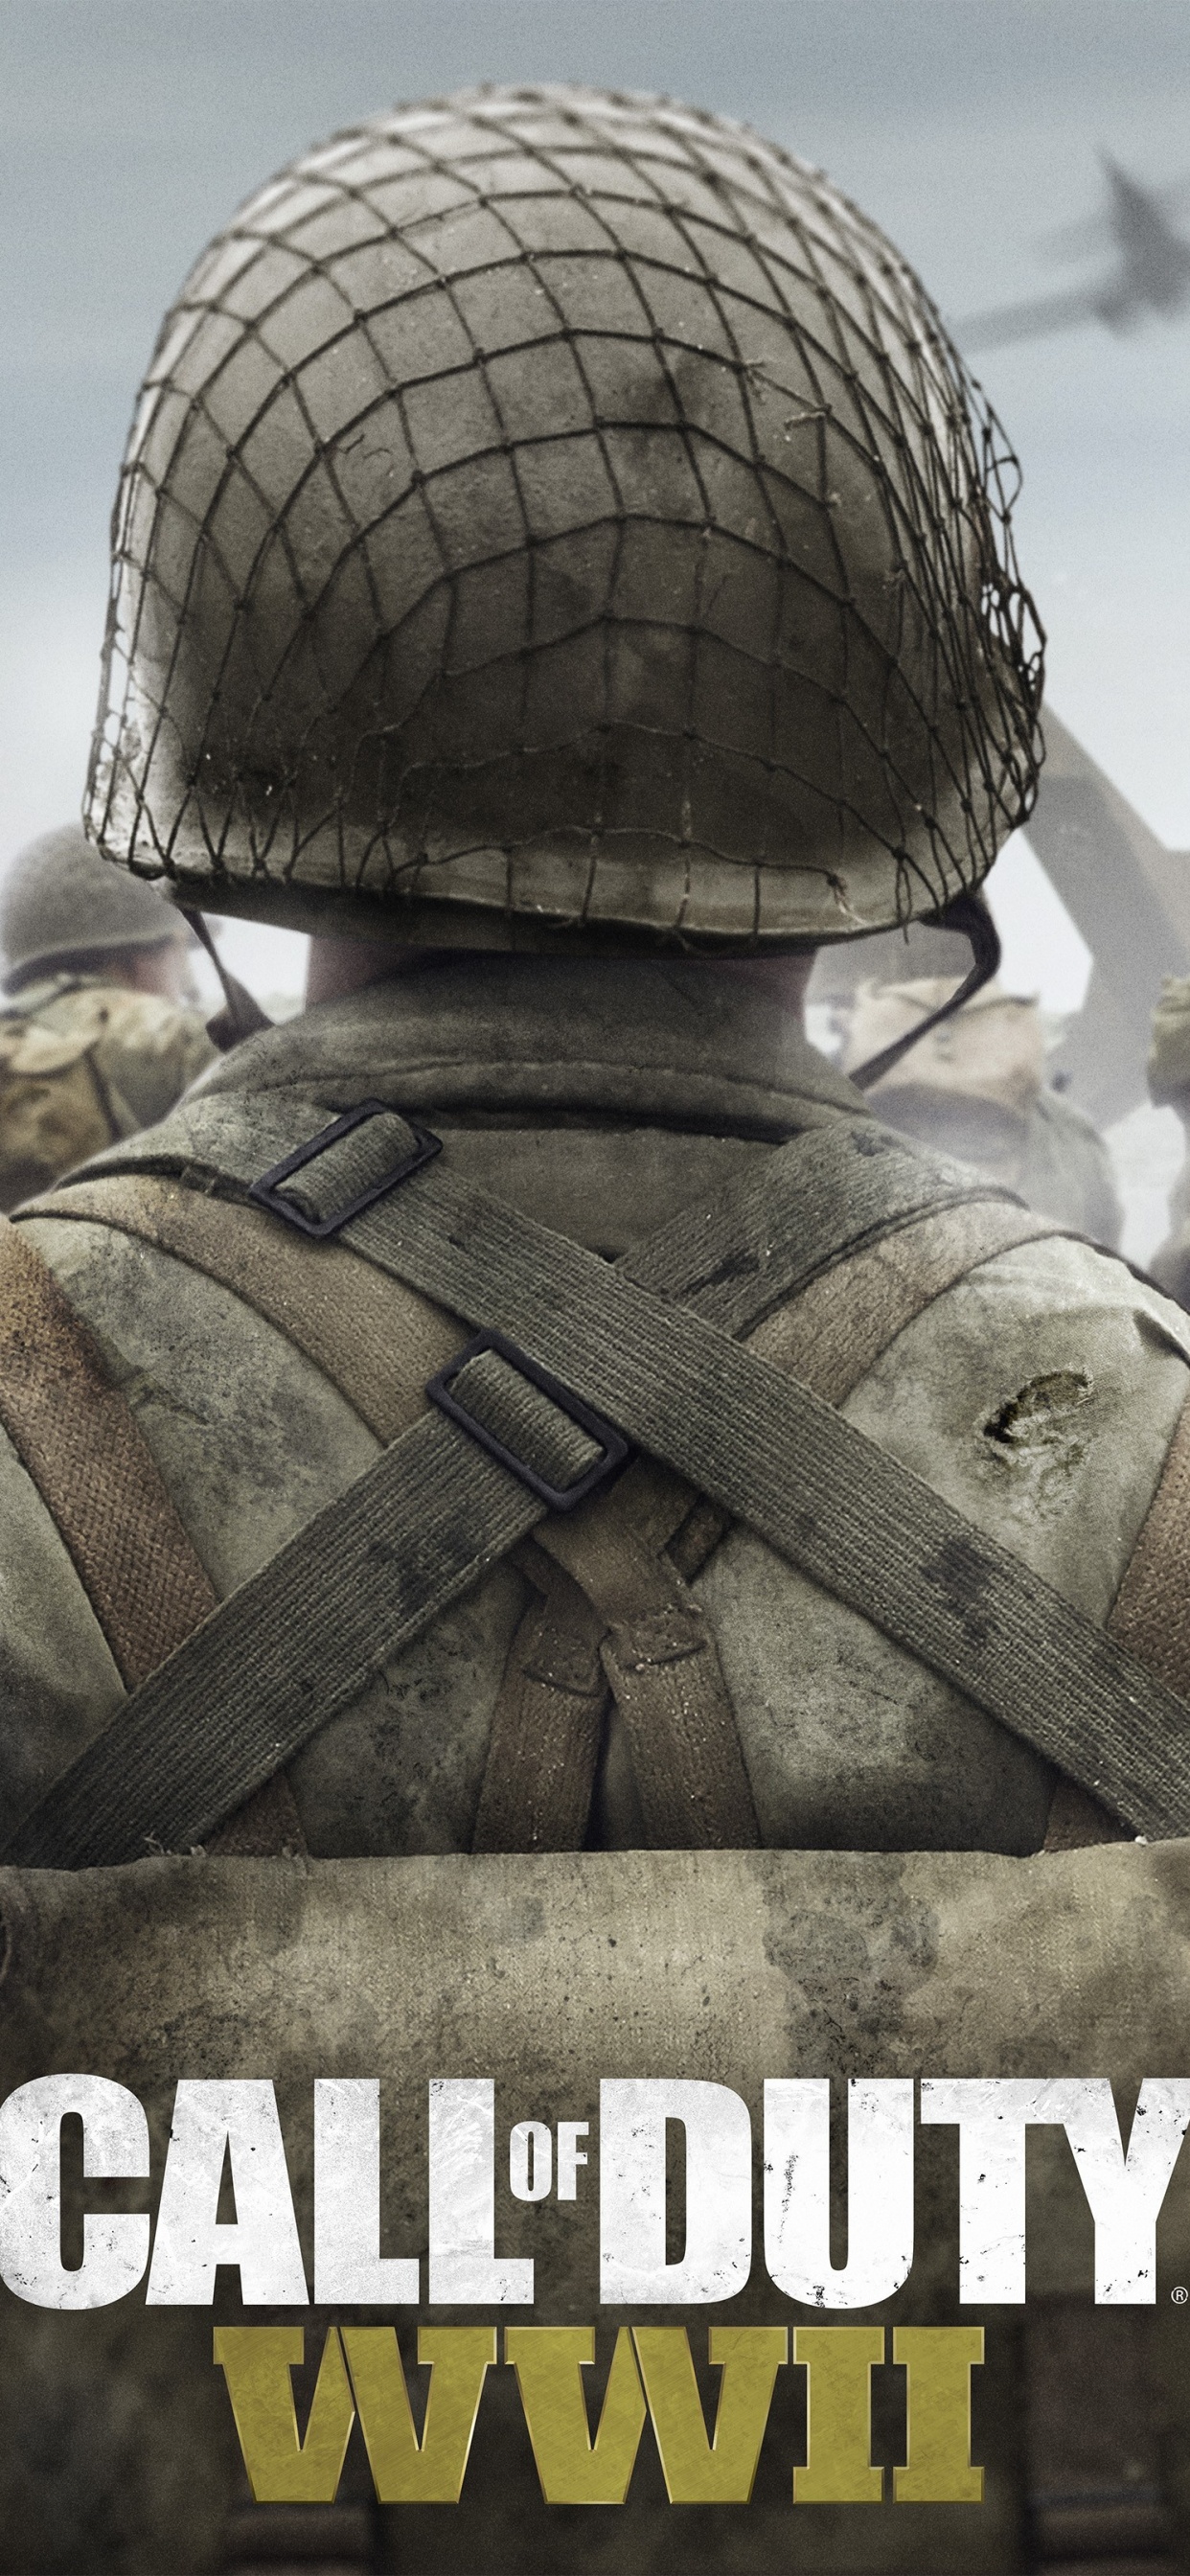 Call of Duty Ww2, Call of Duty WWII, Activision, Sledgehammer Games, Soldier. Wallpaper in 1242x2688 Resolution